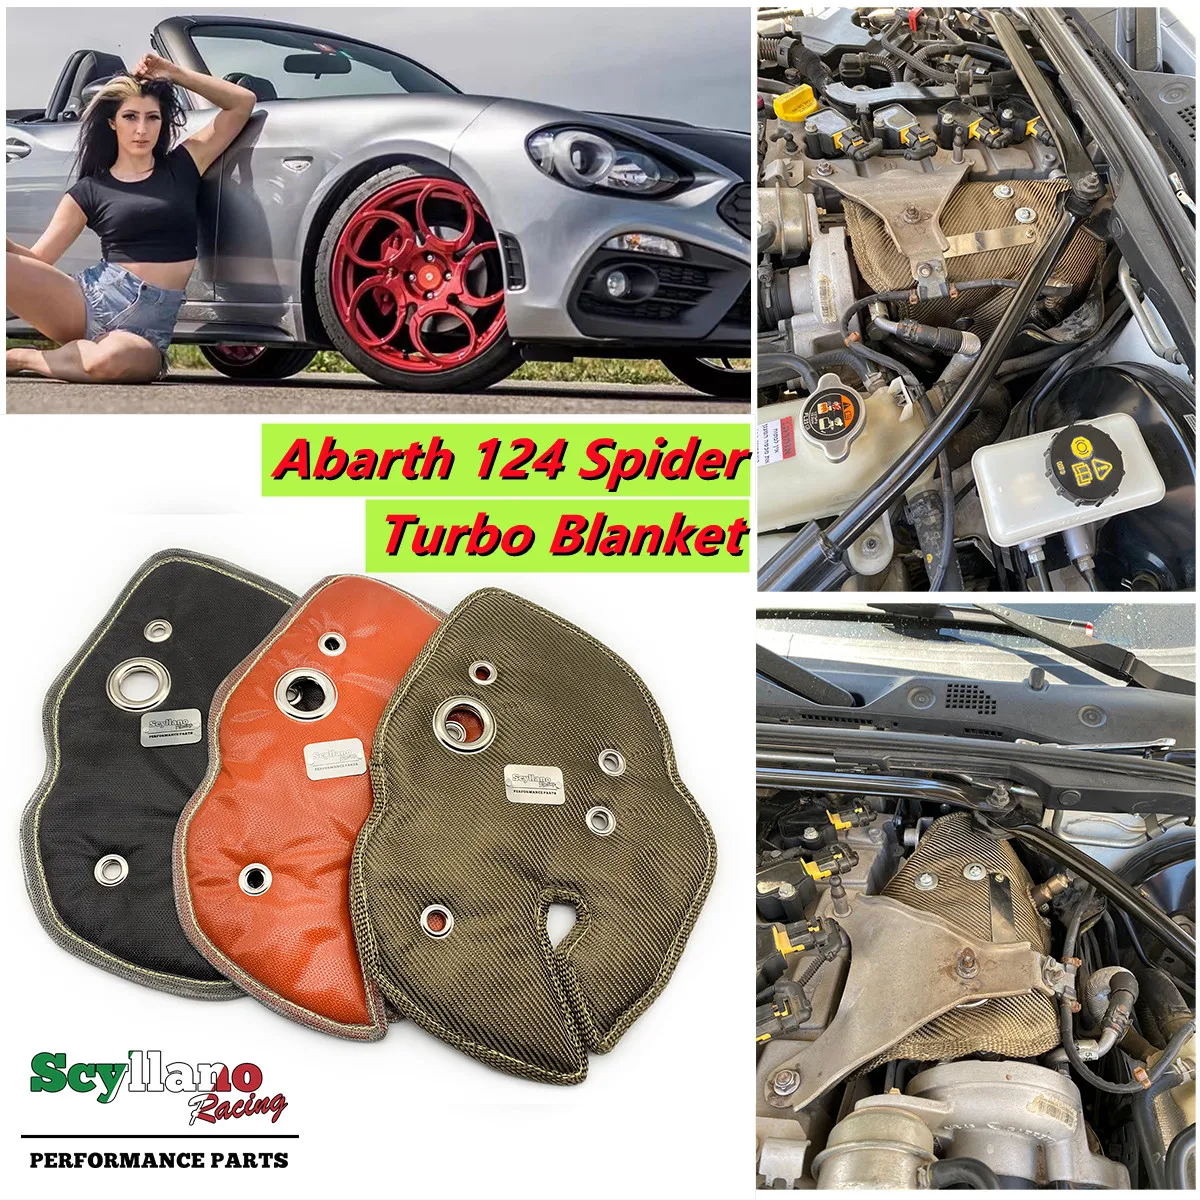 Basalt Silvery Red Fiber Max 70% OFF Shell Turbo Abarth Special sale item Fiat For Blanket